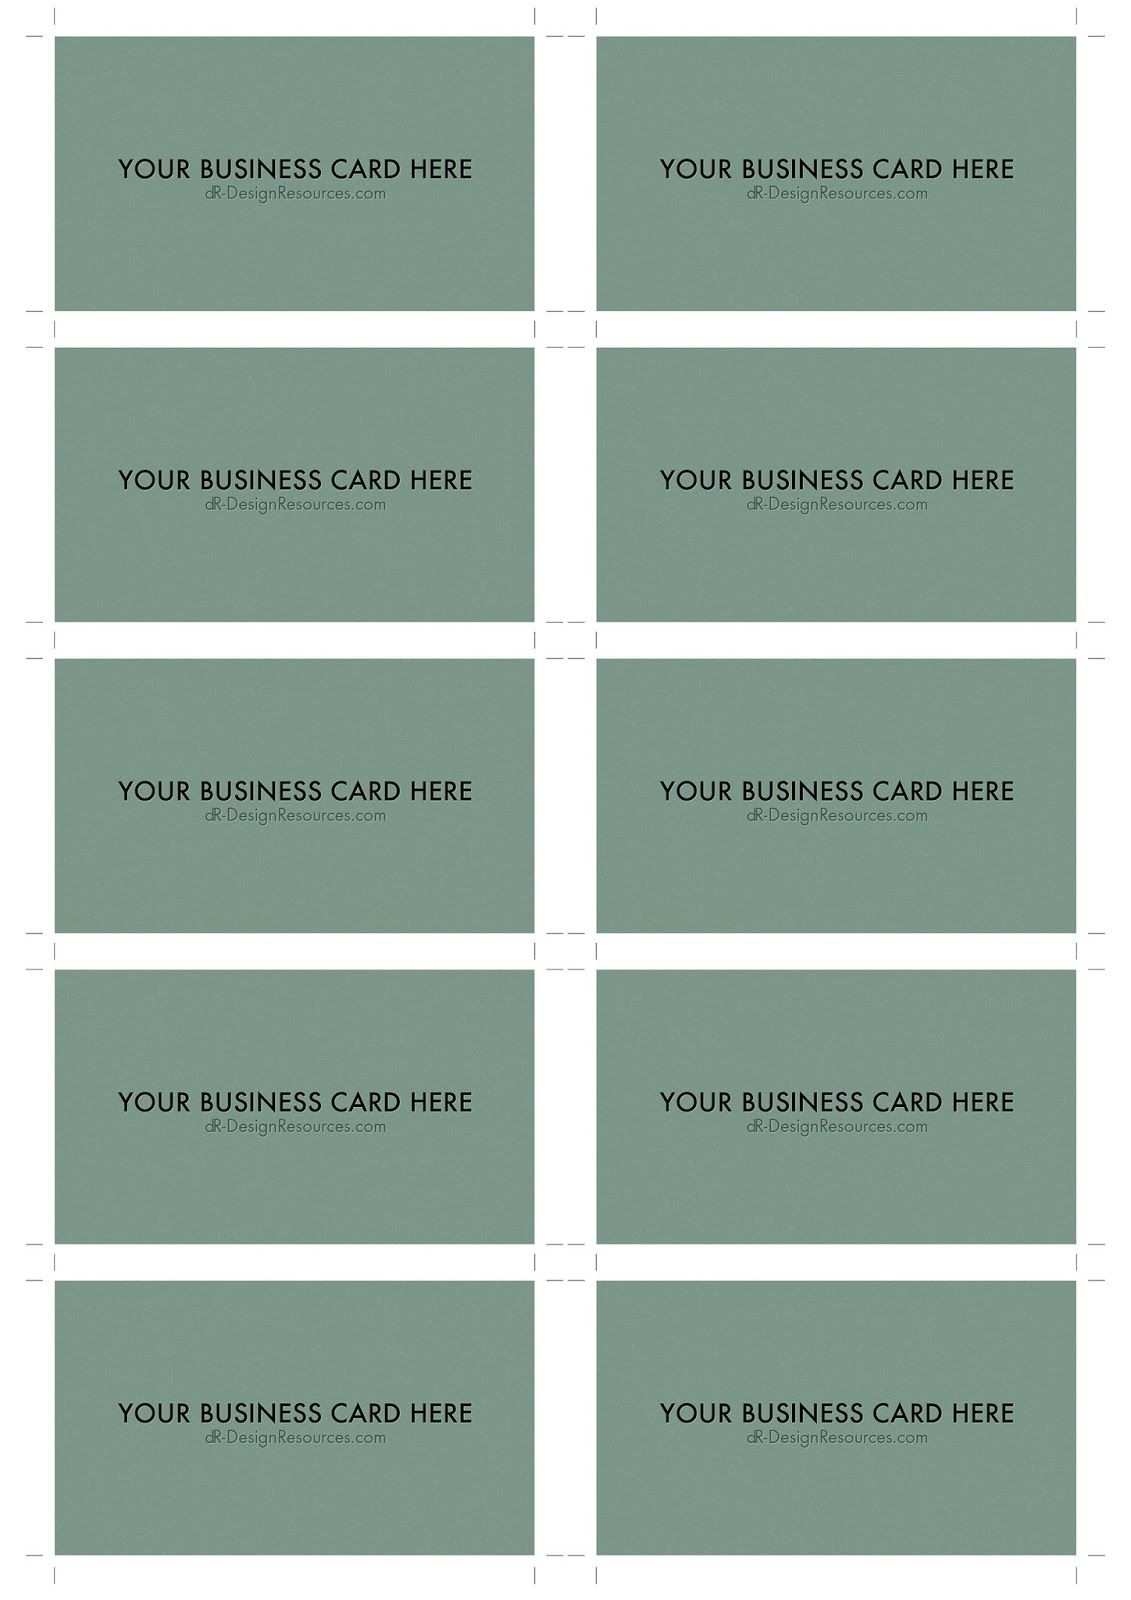 12 Printable Business Card Template Word Online With Stunning Design with Business Card Template Word Online